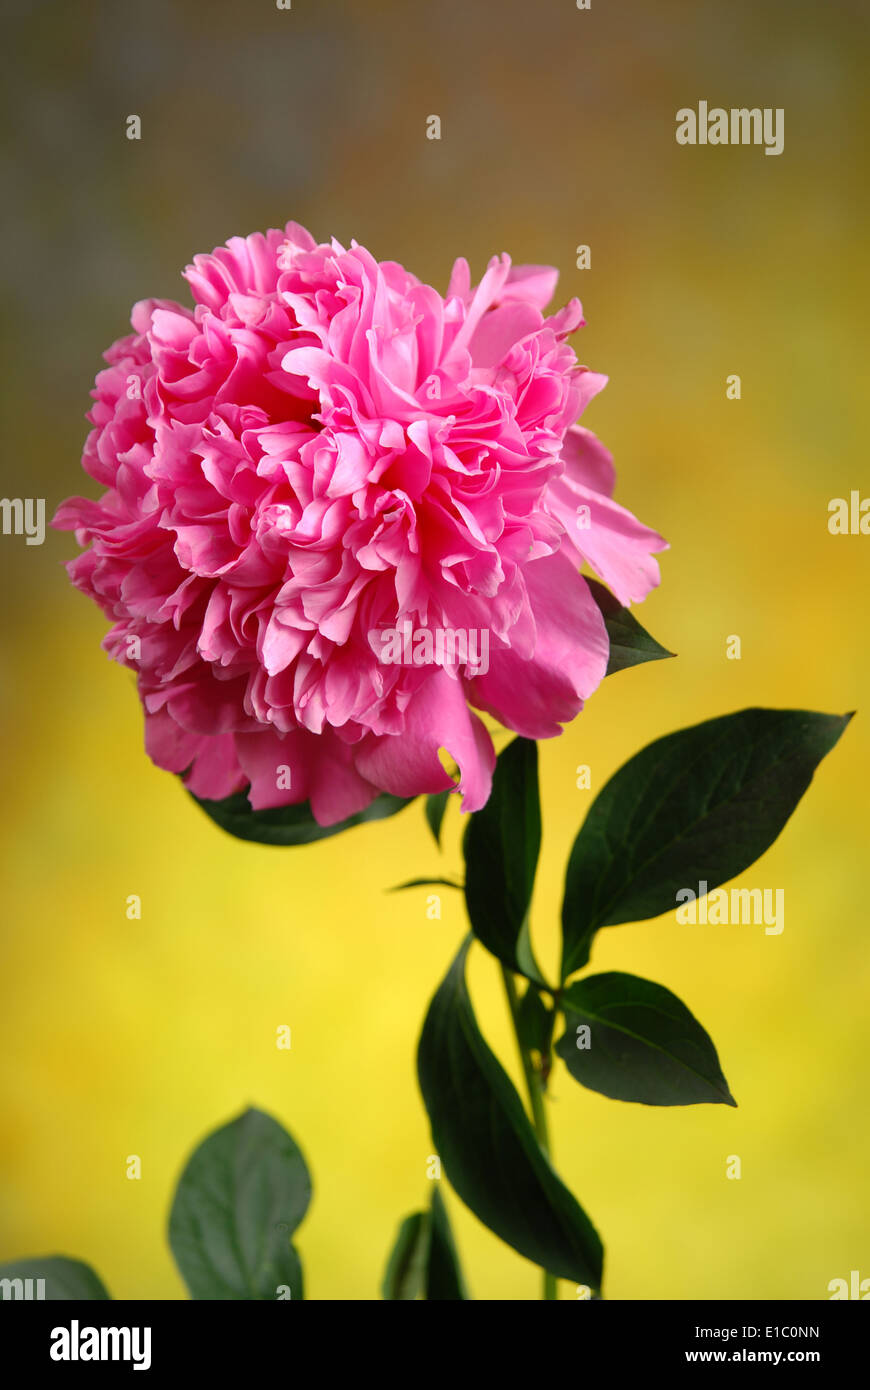 Pink Peony single flower in close-up Stock Photo